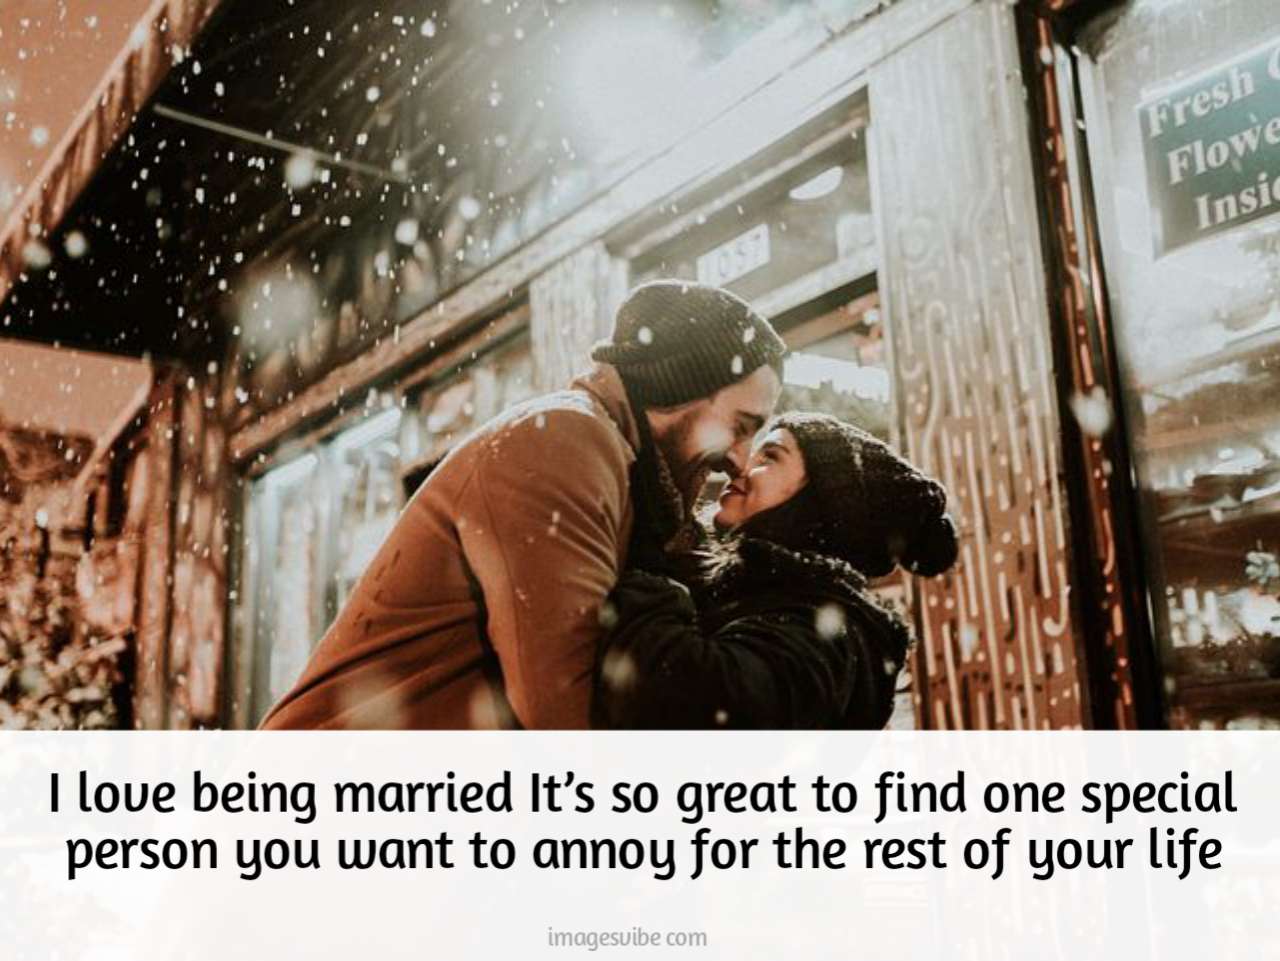 Romantic Images With Quotes8 